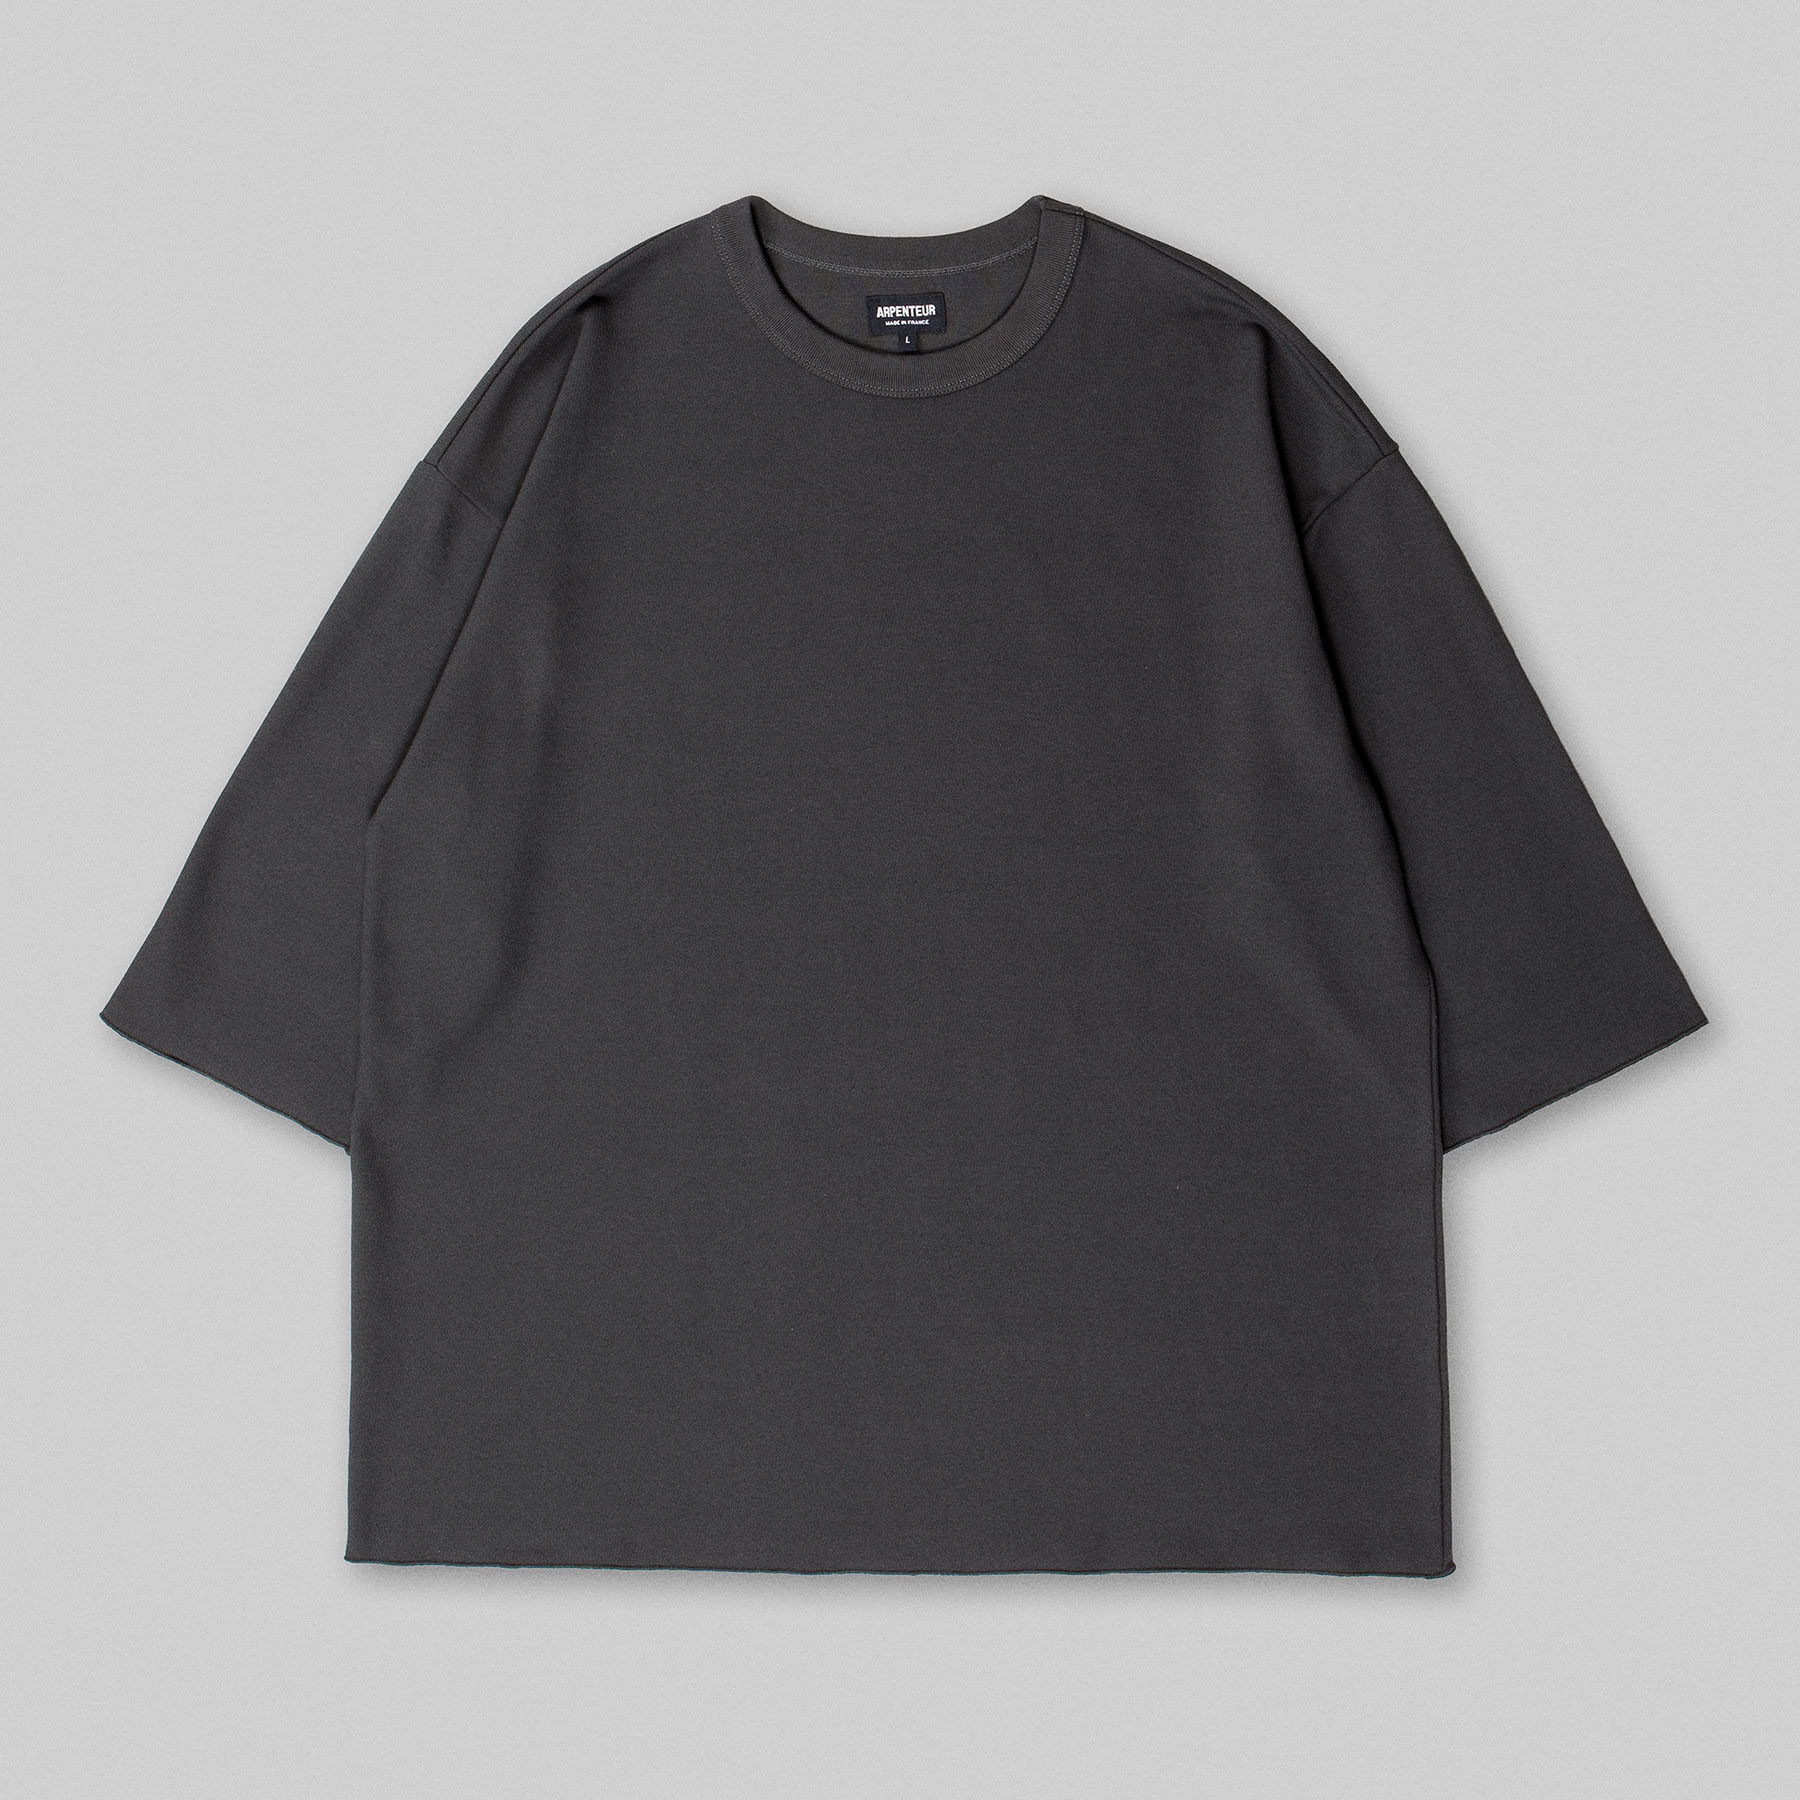 MARINIERE t-shirt by Arpenteur in Charcoal color